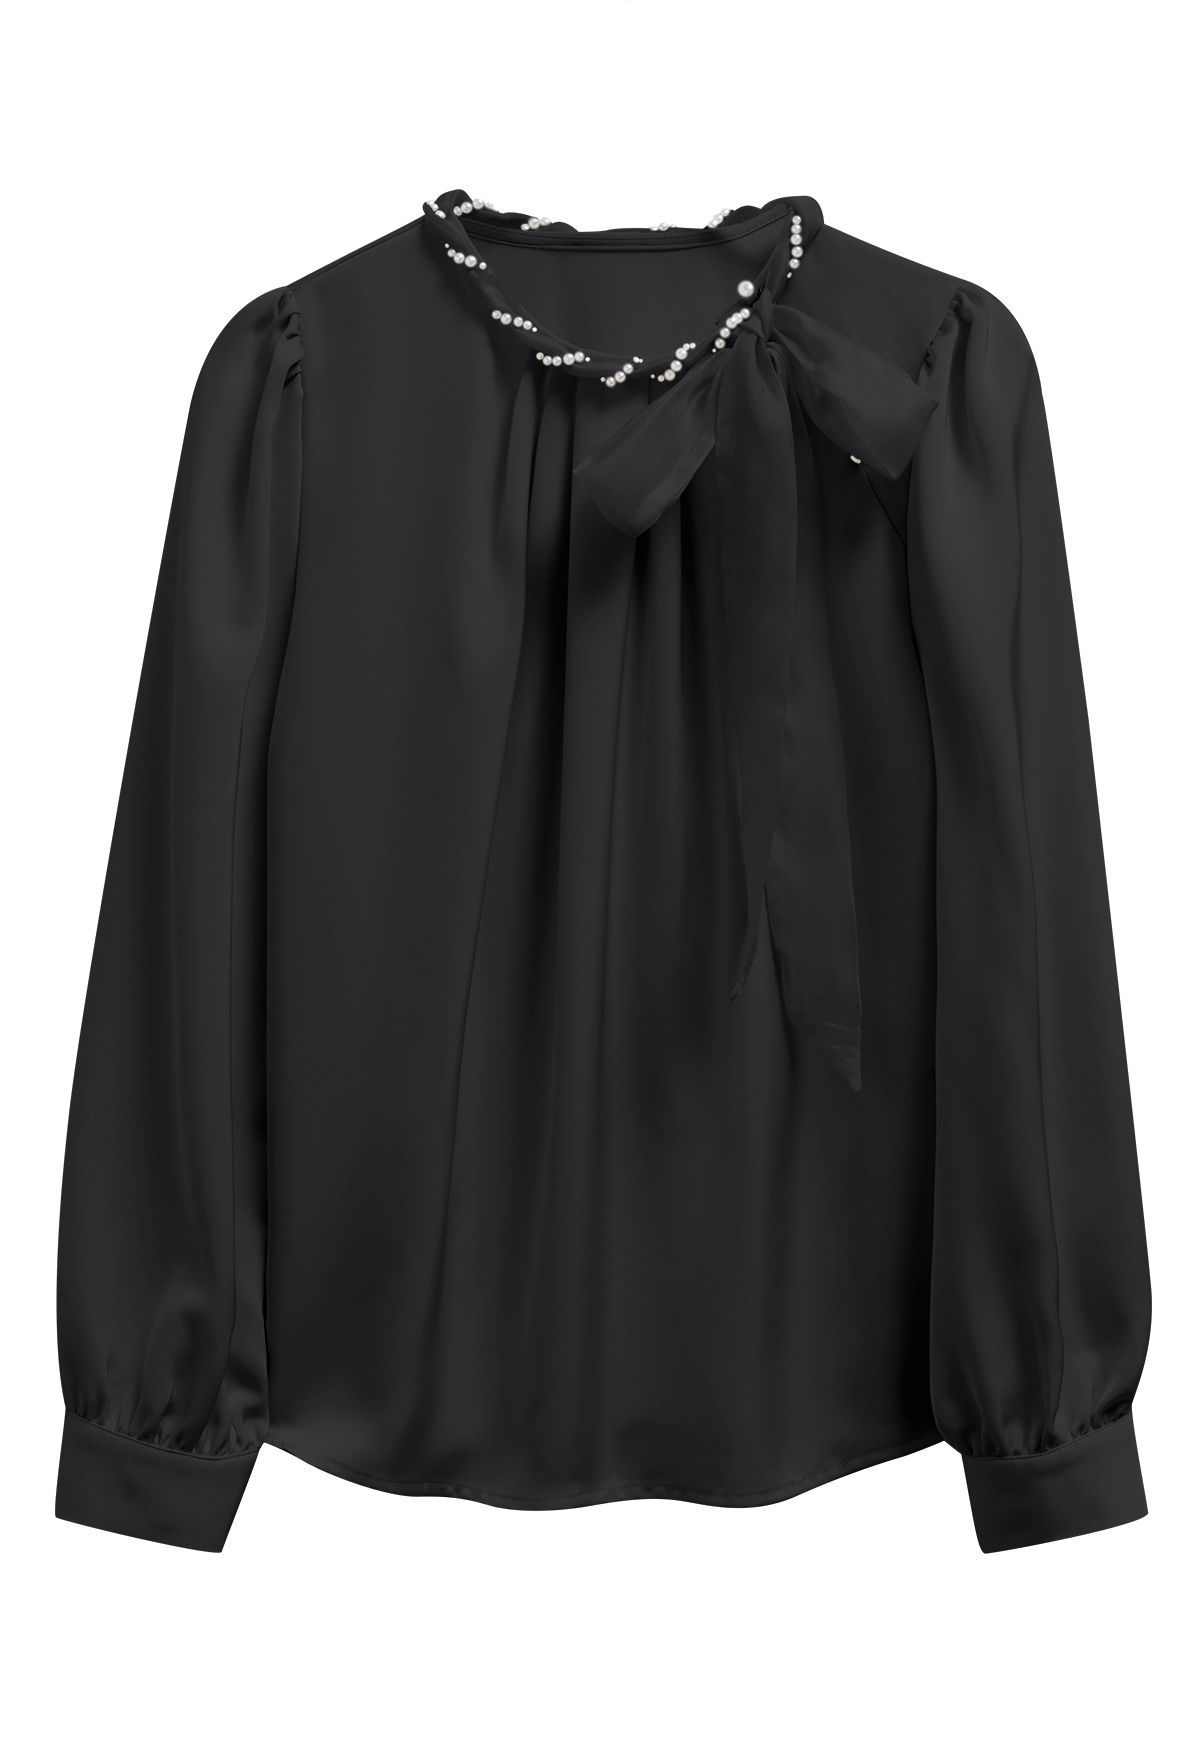 Pearly Neckline Side Bowknot Satin Top in Black | Chicwish